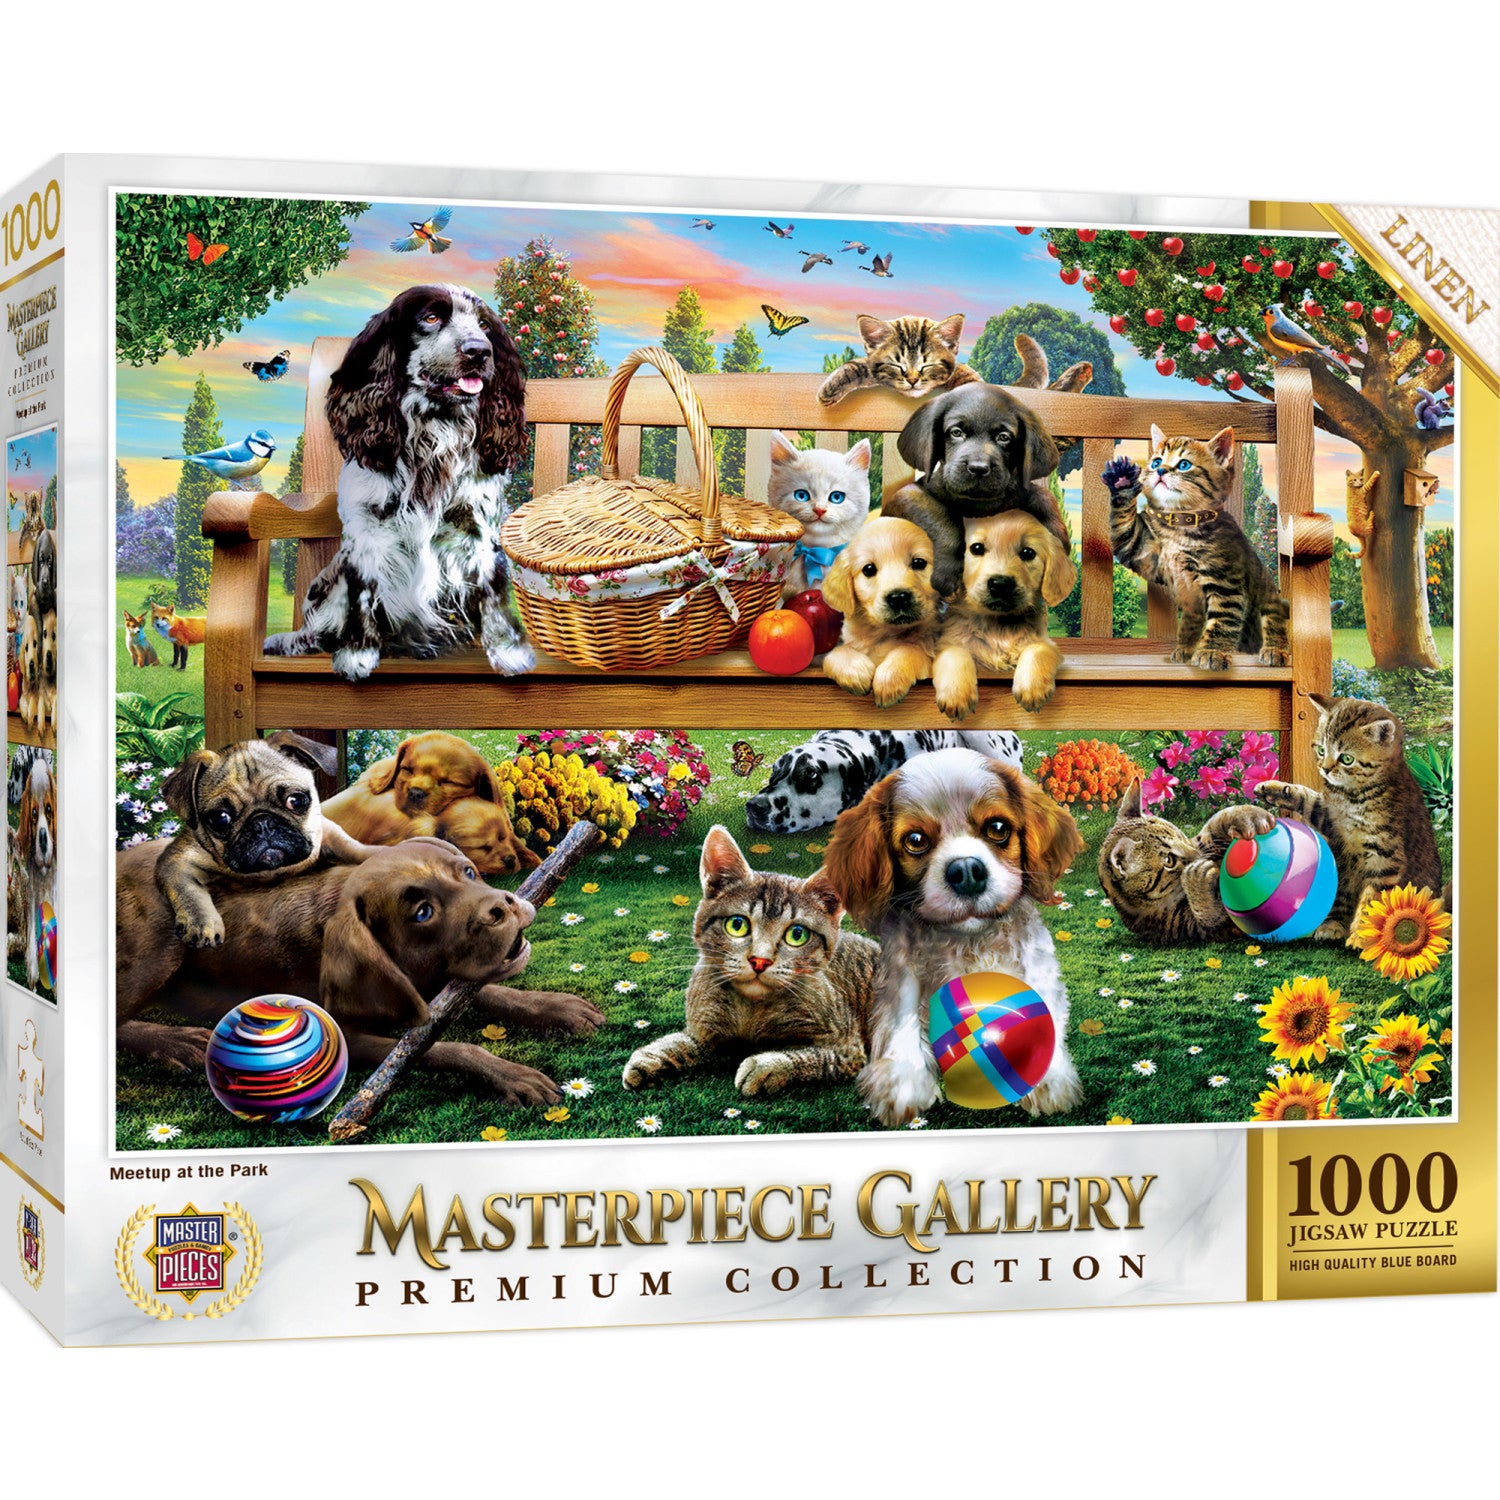 Masterpiece Gallery - Meetup at the Park 1000 Piece Jigsaw Puzzle